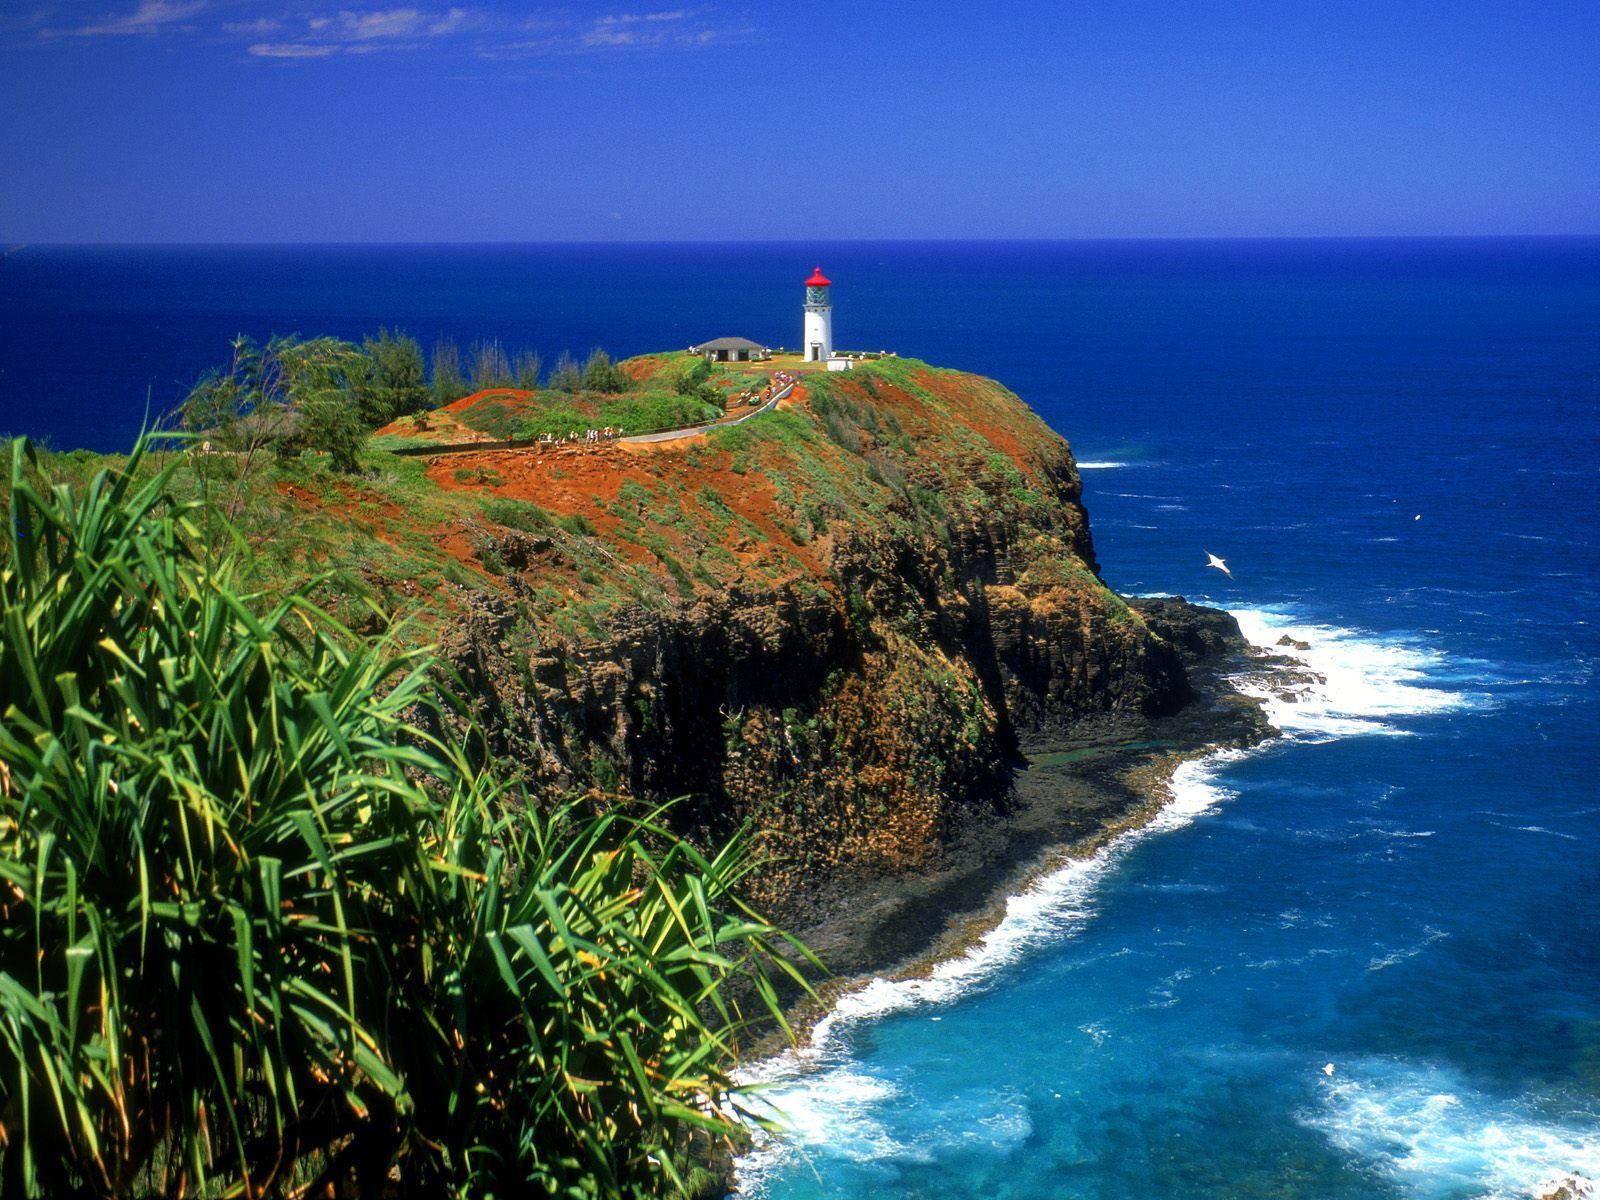 Kilauea Lighthouse Kauai Hawaii. It really is that pretty in person ...